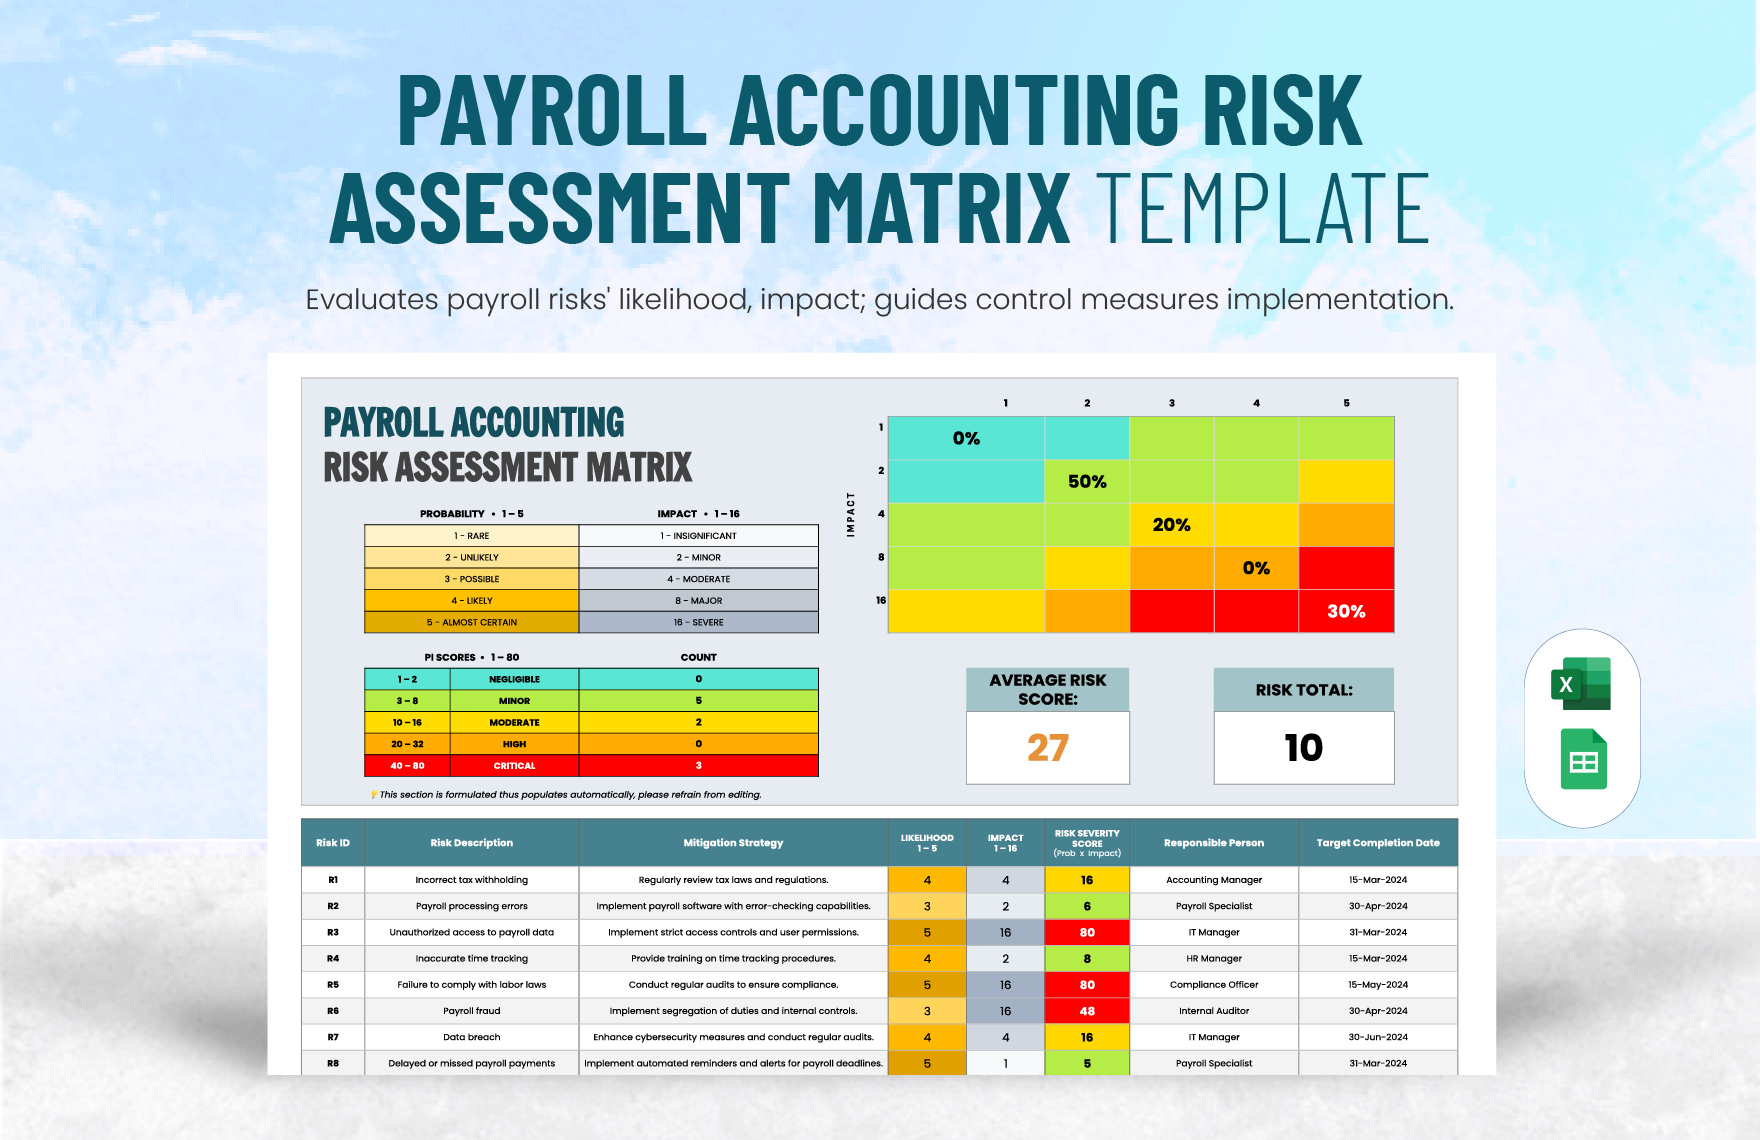 Payroll Accounting Risk Assessment Matrix Template in Excel, Google Sheets